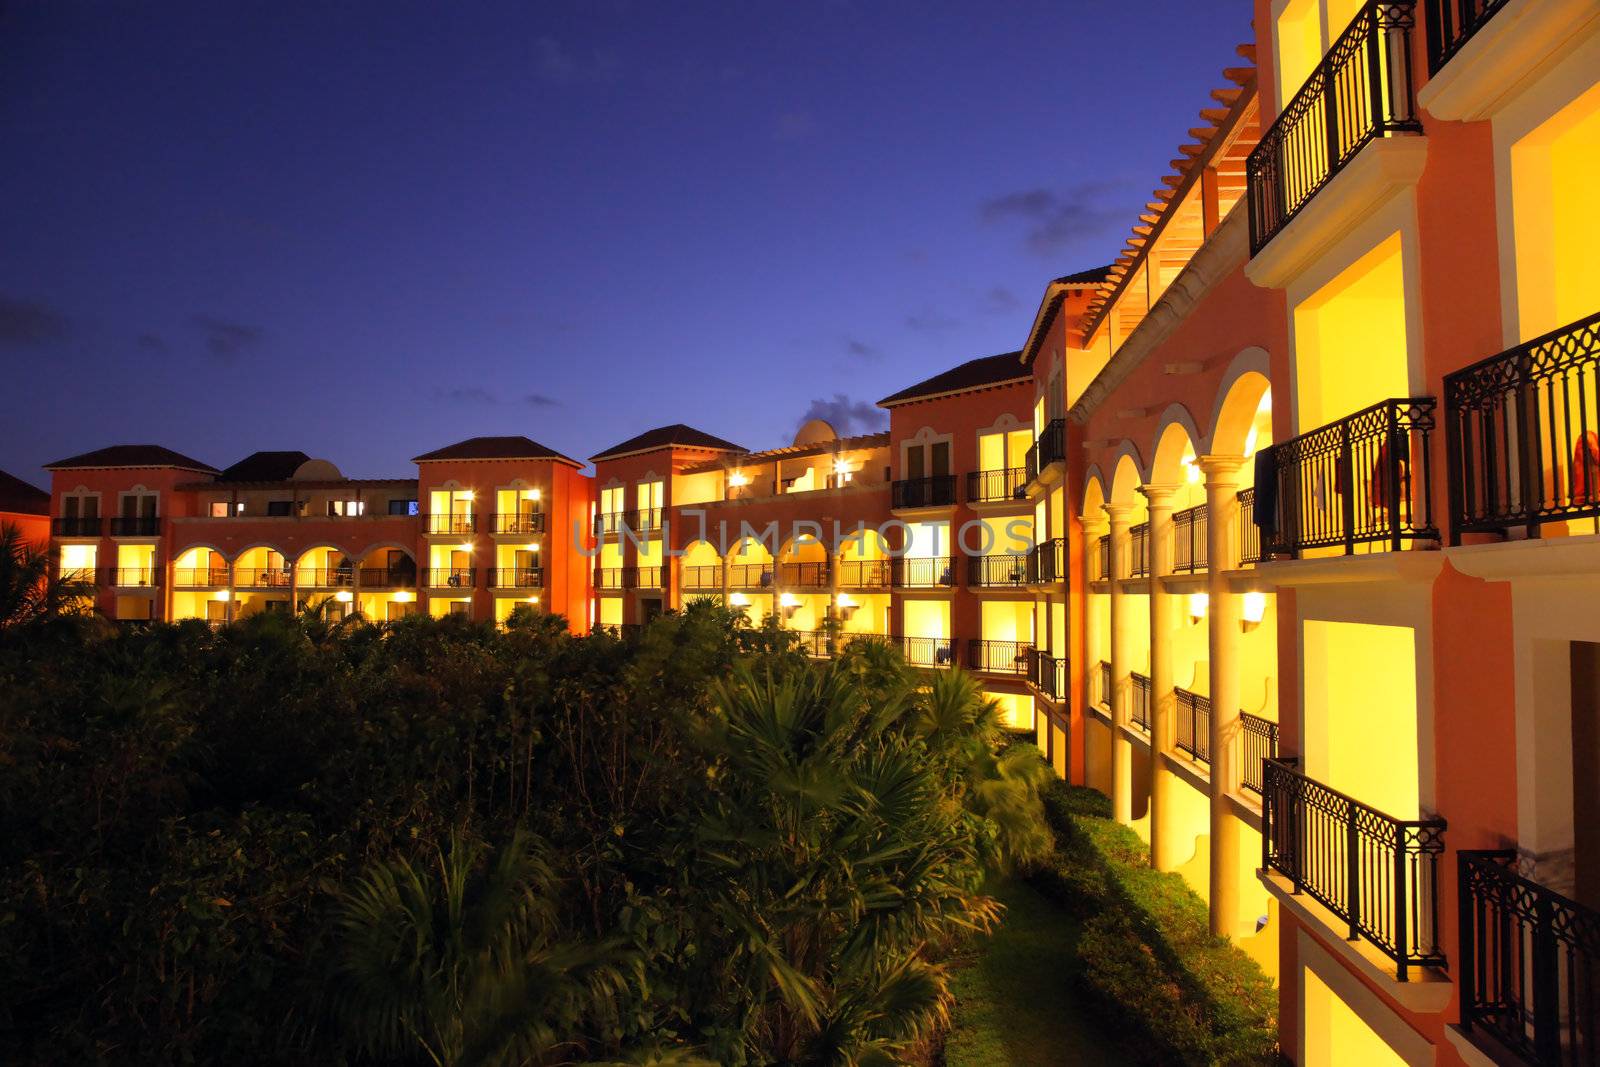 Gorgeous tropical five stars resort at sunset with all the rooms with balconies lit up.